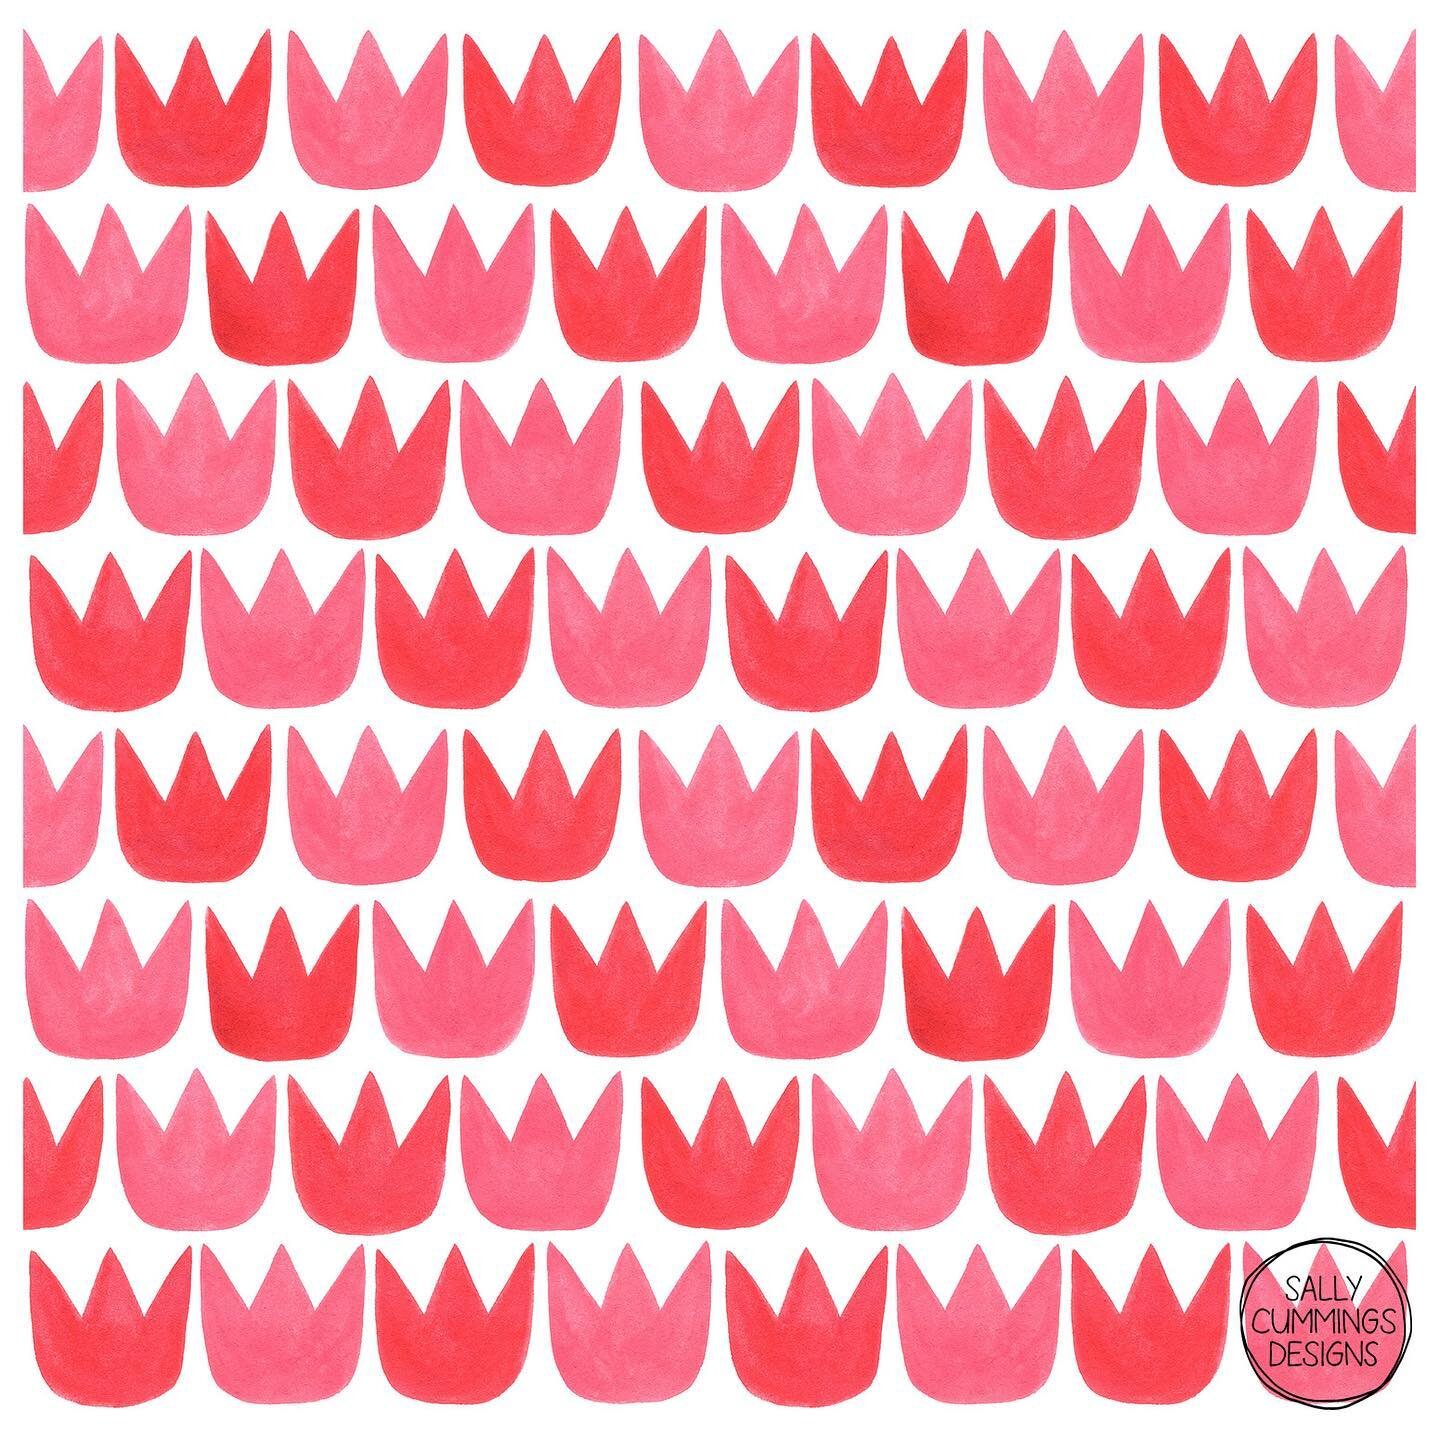 A little throwback today to my sweet and simple hand painted Tiptoe Tulips pattern 😊 Available through my Society6, Redbubble and Spoonflower stores 🌷

#sallycummingsdesigns #society6 #redbubble #patterndesign #textiledesign #surfacedesign